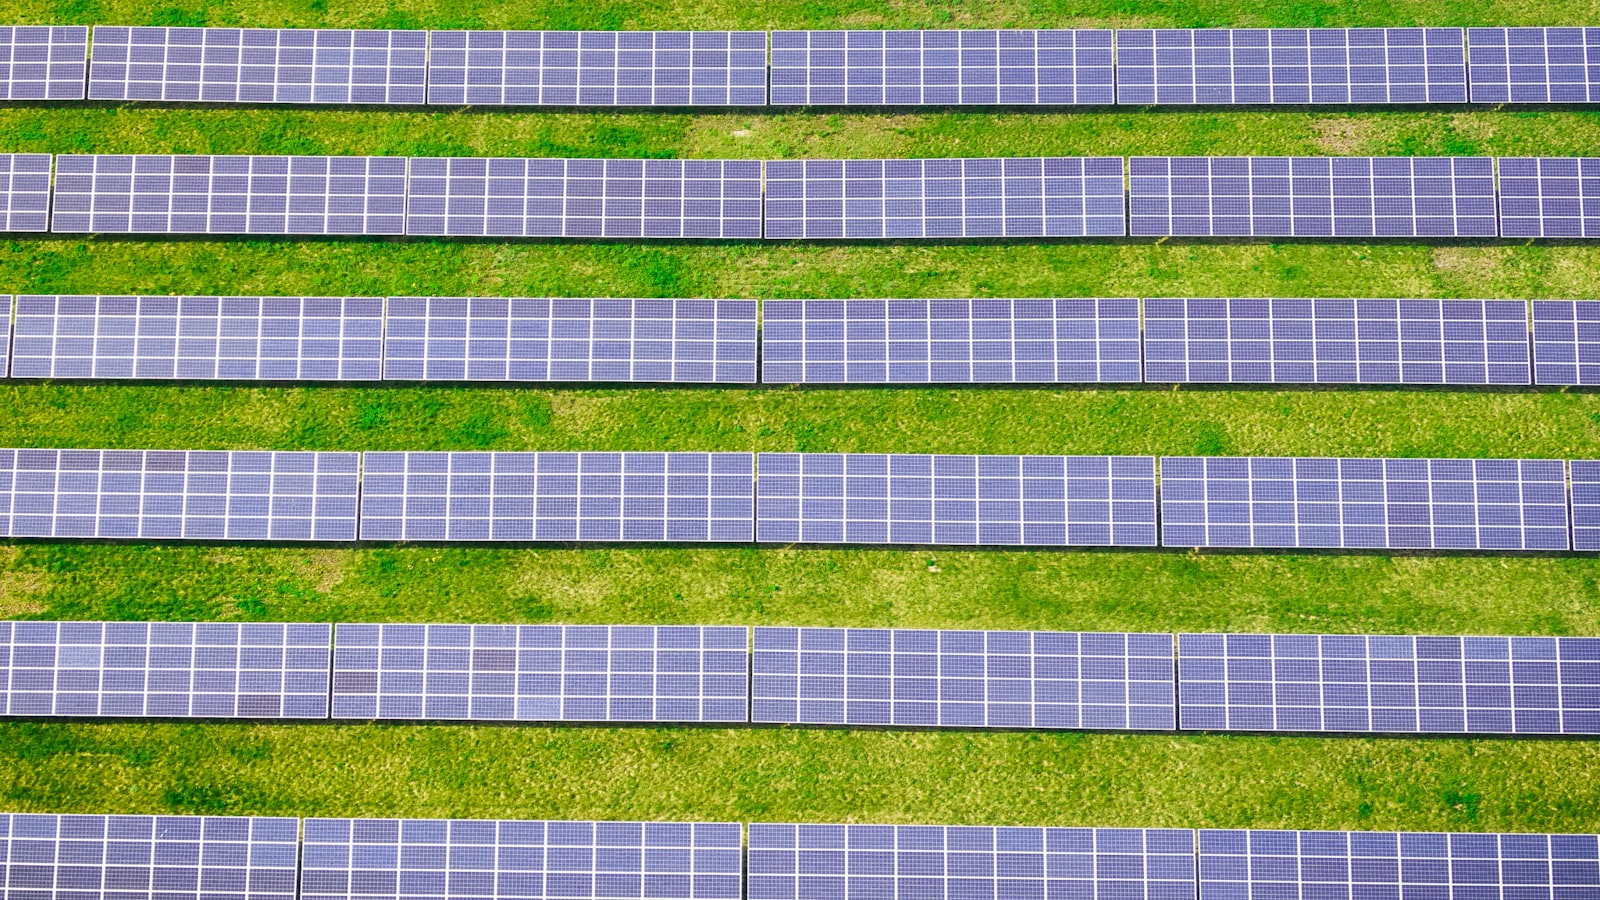 Do Solar Panels Use A Lot Of Electricity?